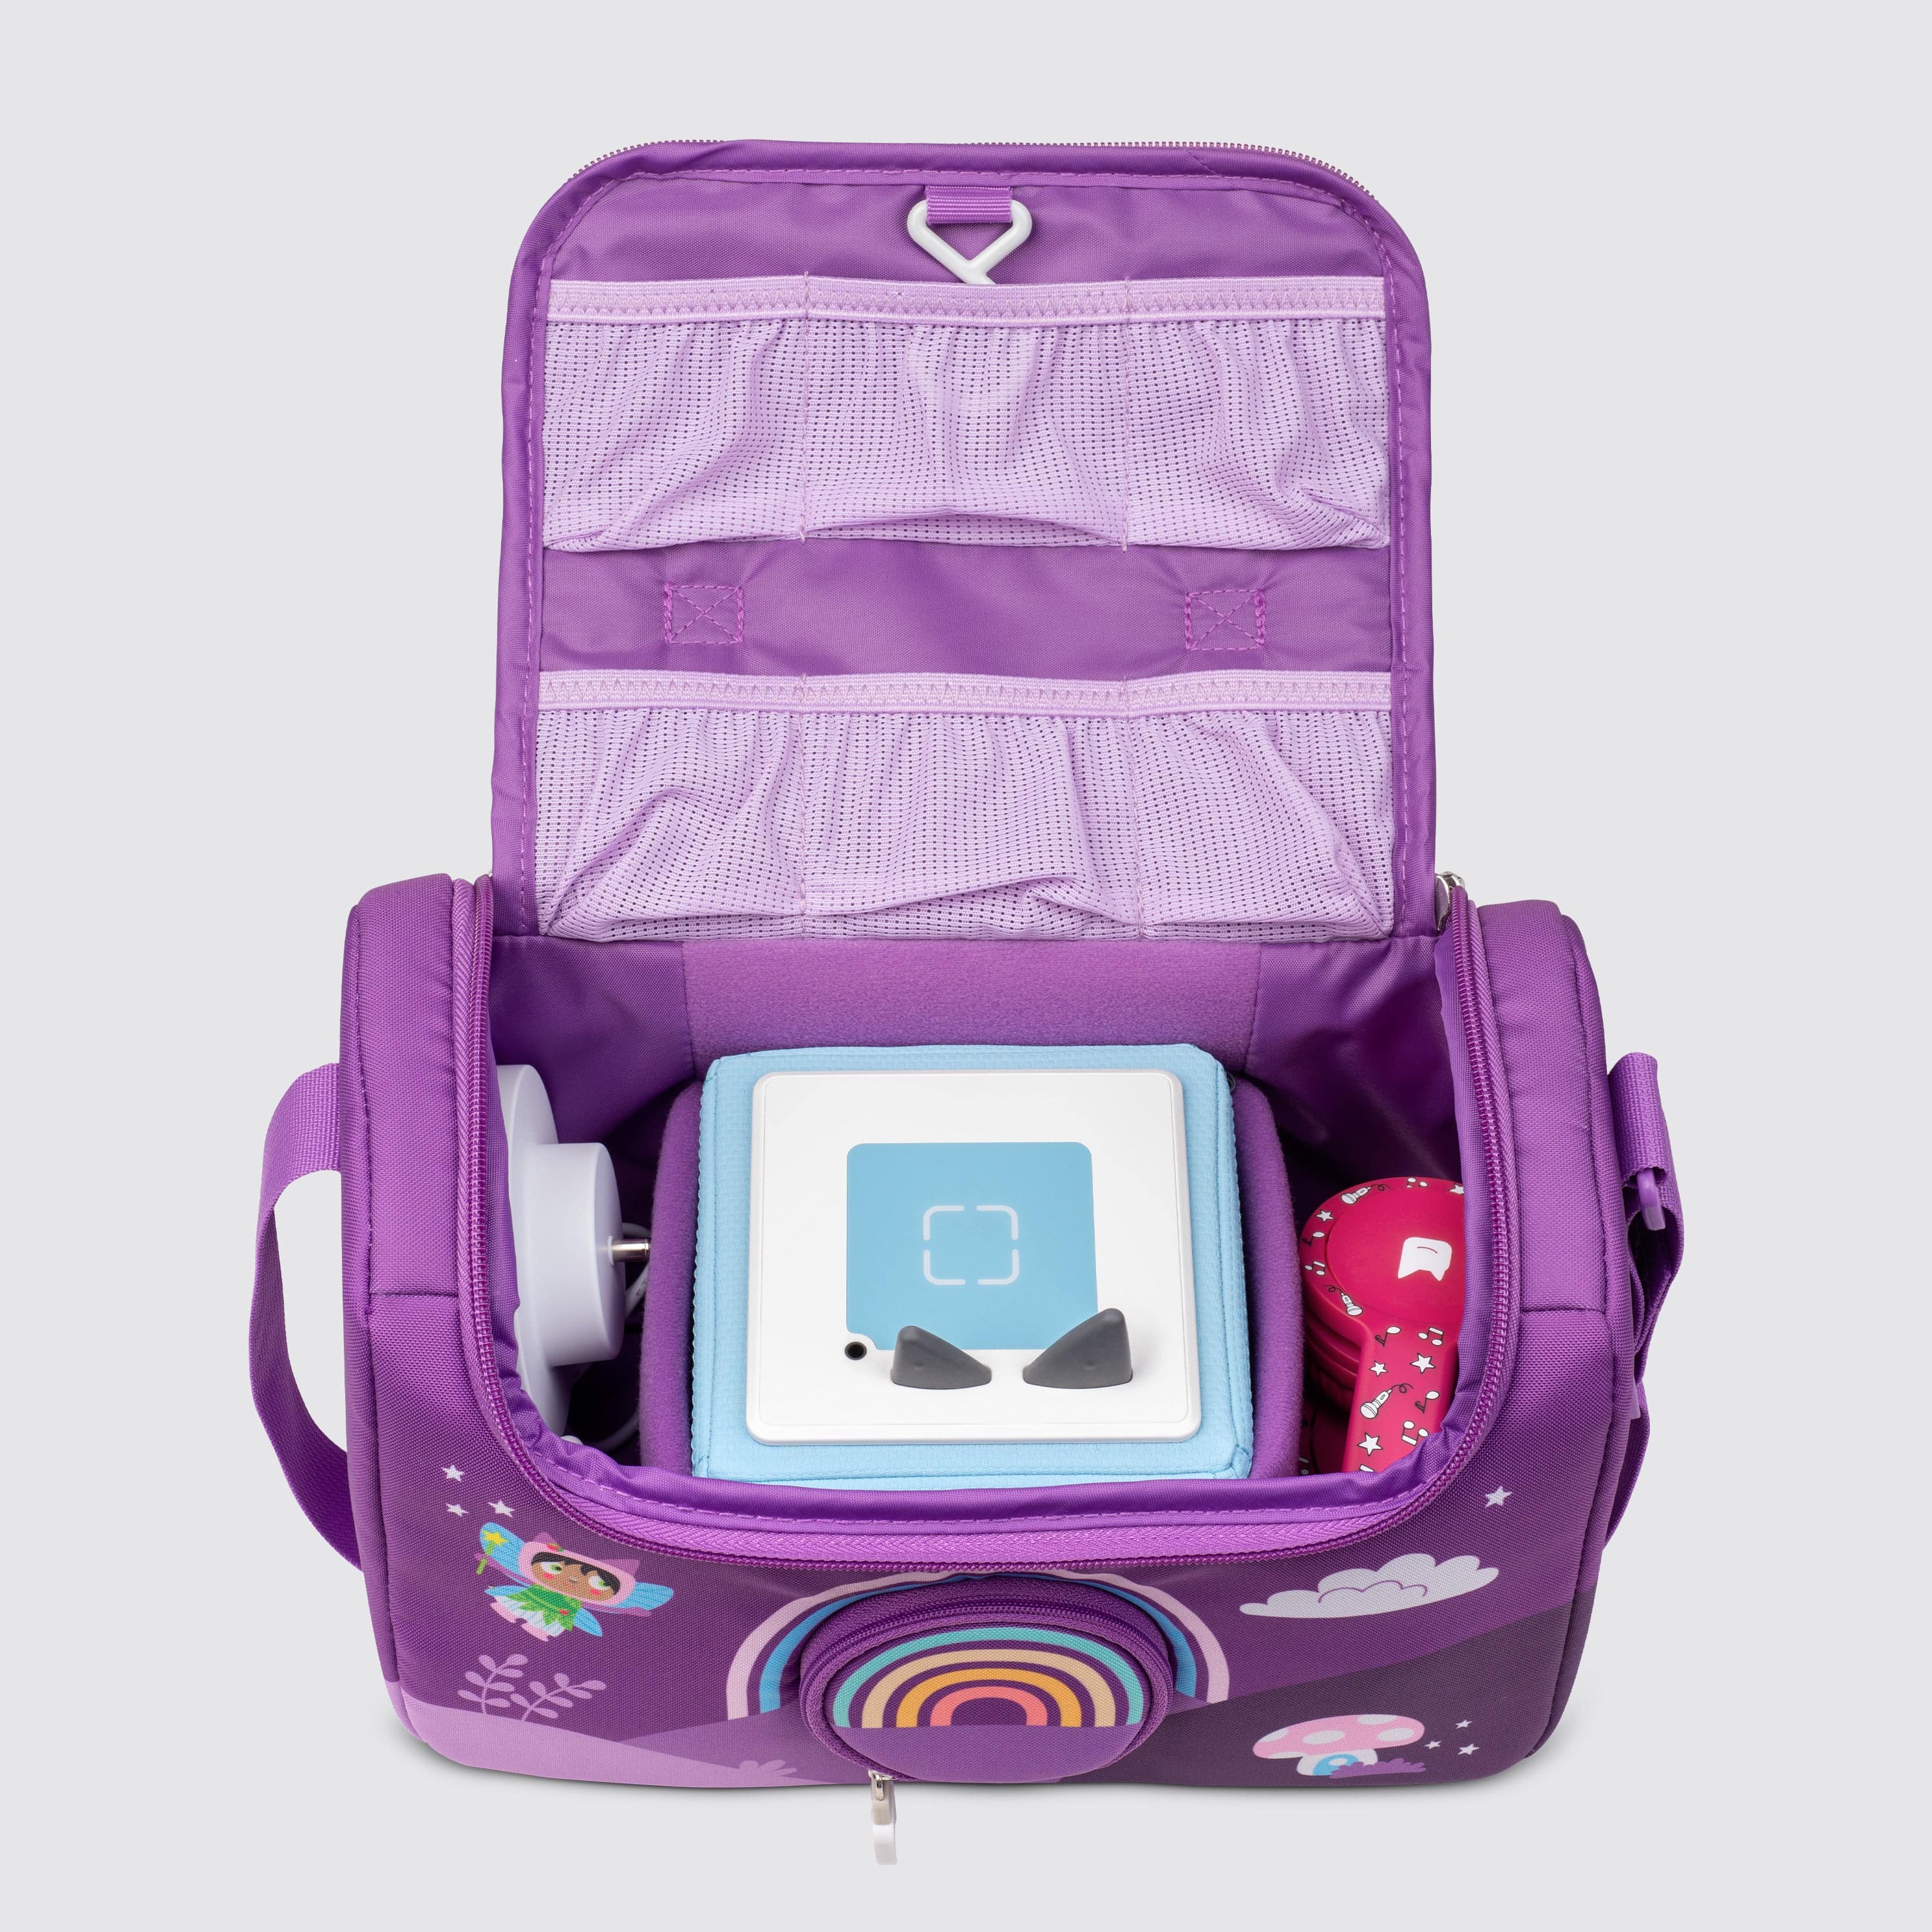 Tonies Carrying Case Max [Does Not Fit Toniebox] - Fun Stage and Storage  for up to 14 Characters - Over the Rainbow